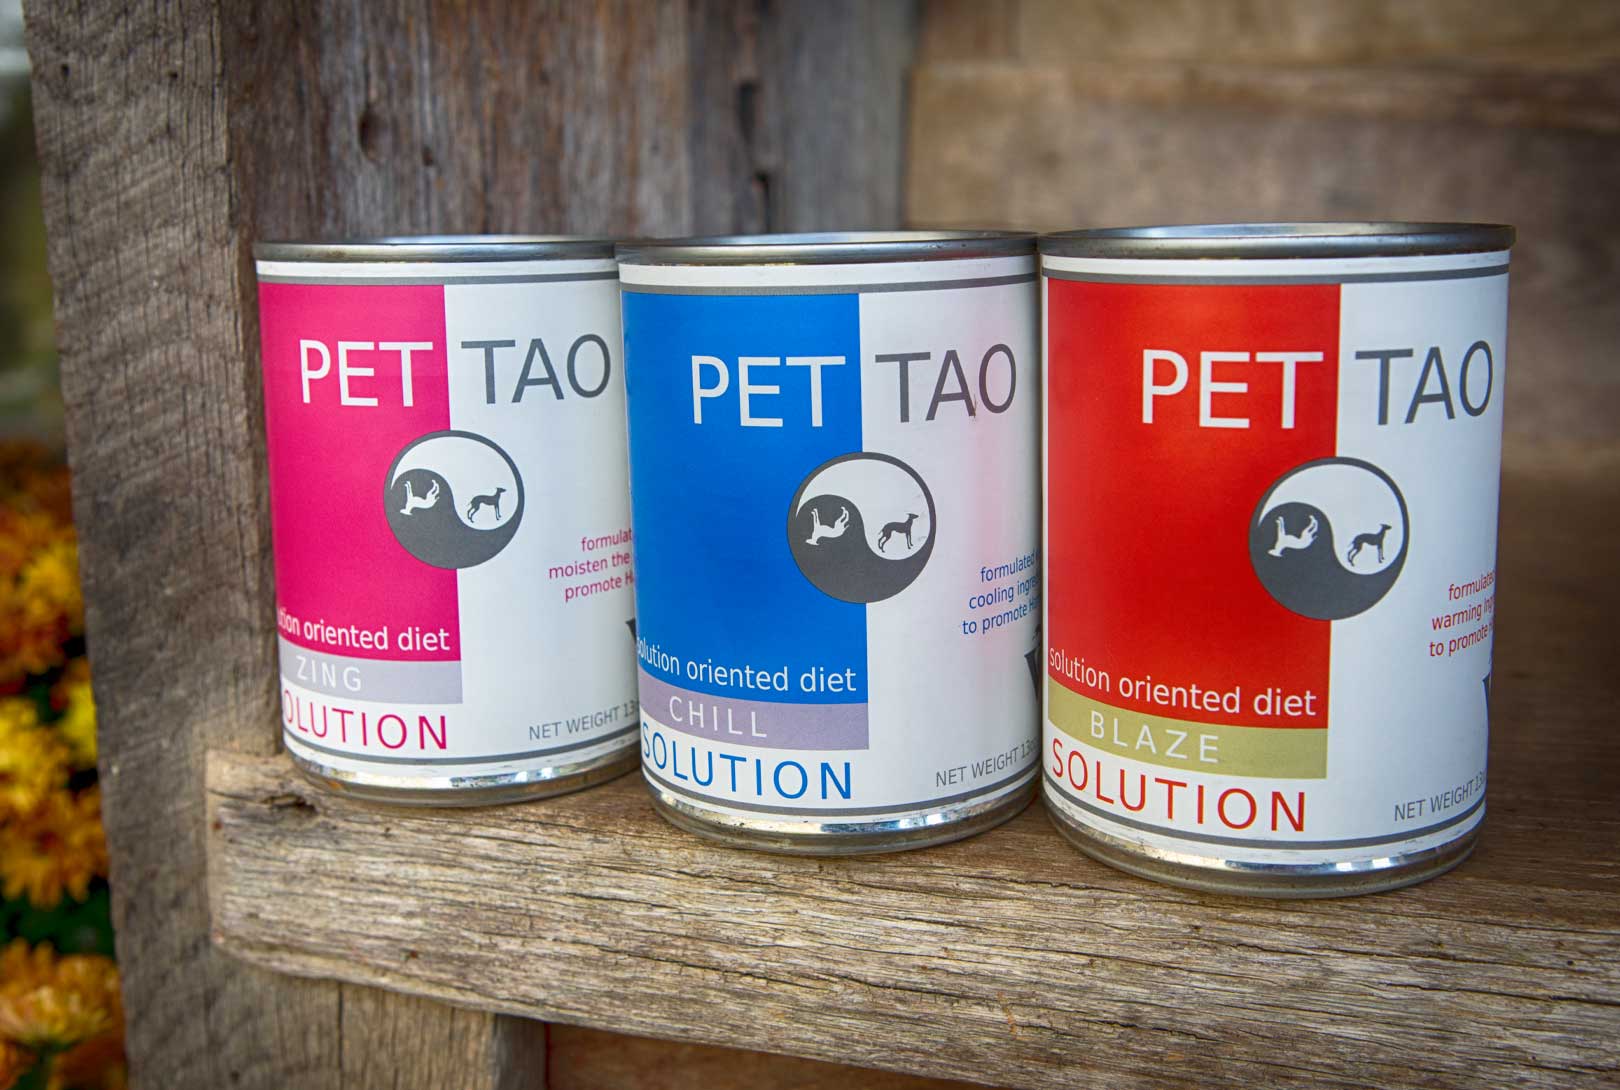 Pet Tao holistic dog food in the can in flavors Blaze solution, Chill solution, and Zing solution